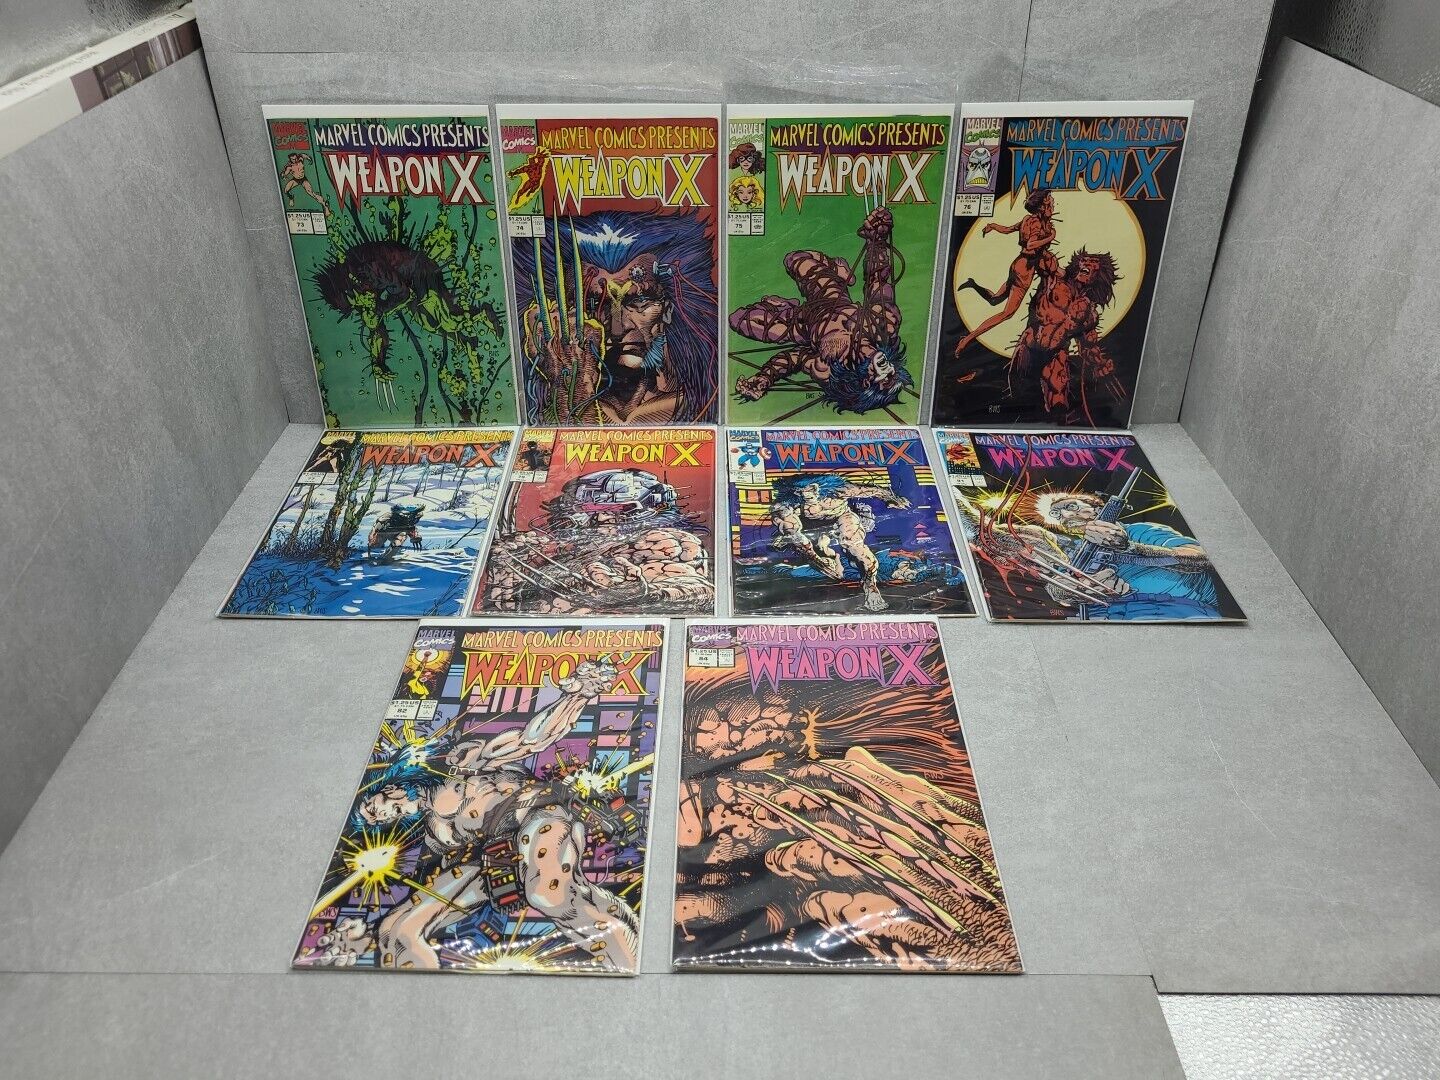 1991 Marvel Comics Presents Weapon X Lot #73-77 79-84 Preowned Board And Bagged 